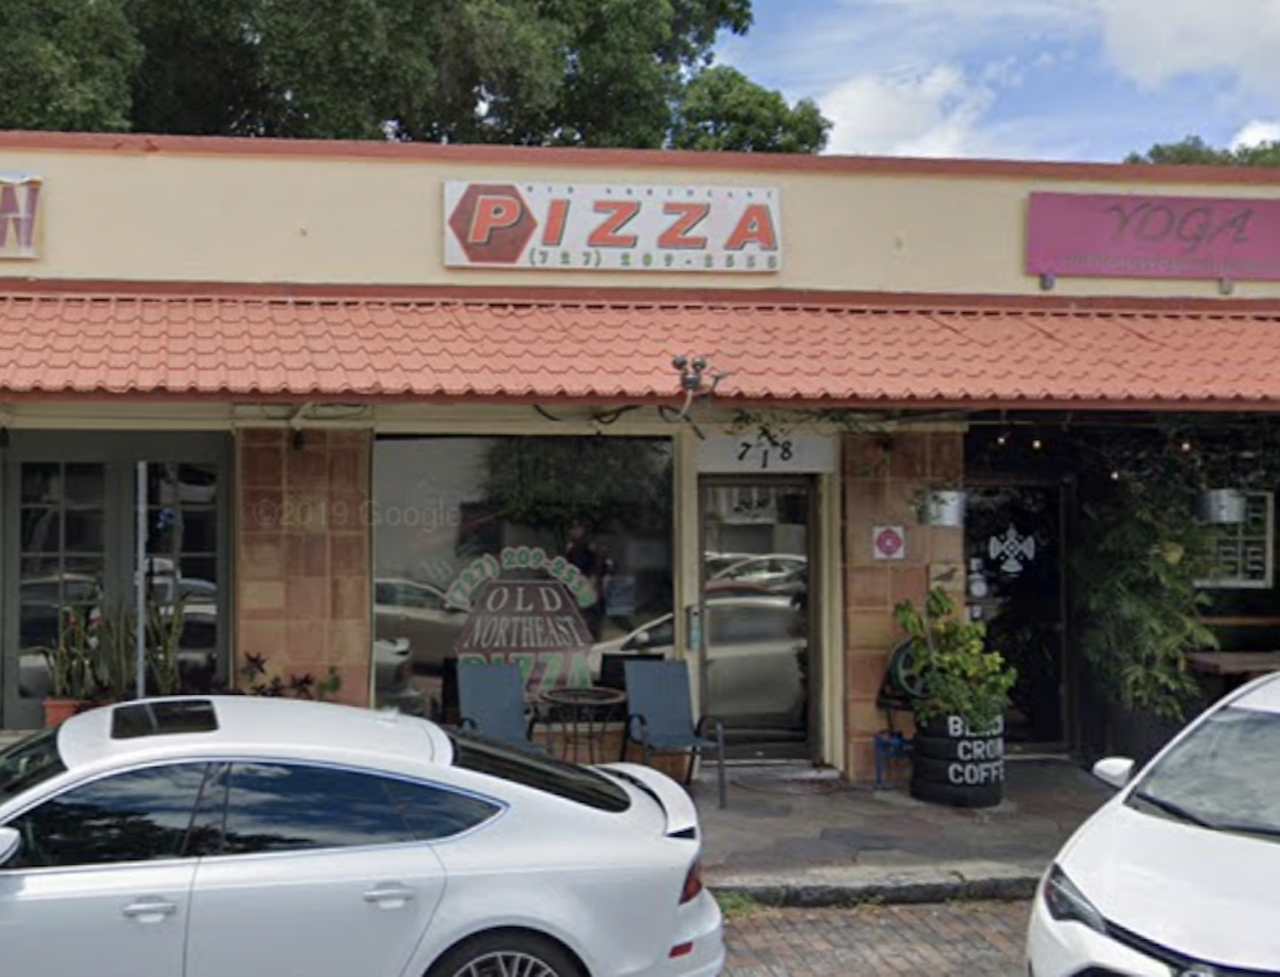 Old Northeast Pizza
718 2nd St. N, St. Petersburg, 727-209-2550
Northeast is as traditional as it gets, with reviews raving about its made-to-order quality and the convenience of its residential location. Make sure you have some cash handy when you enter, as the establishment doesn’t take cards.
Photo via Google Maps